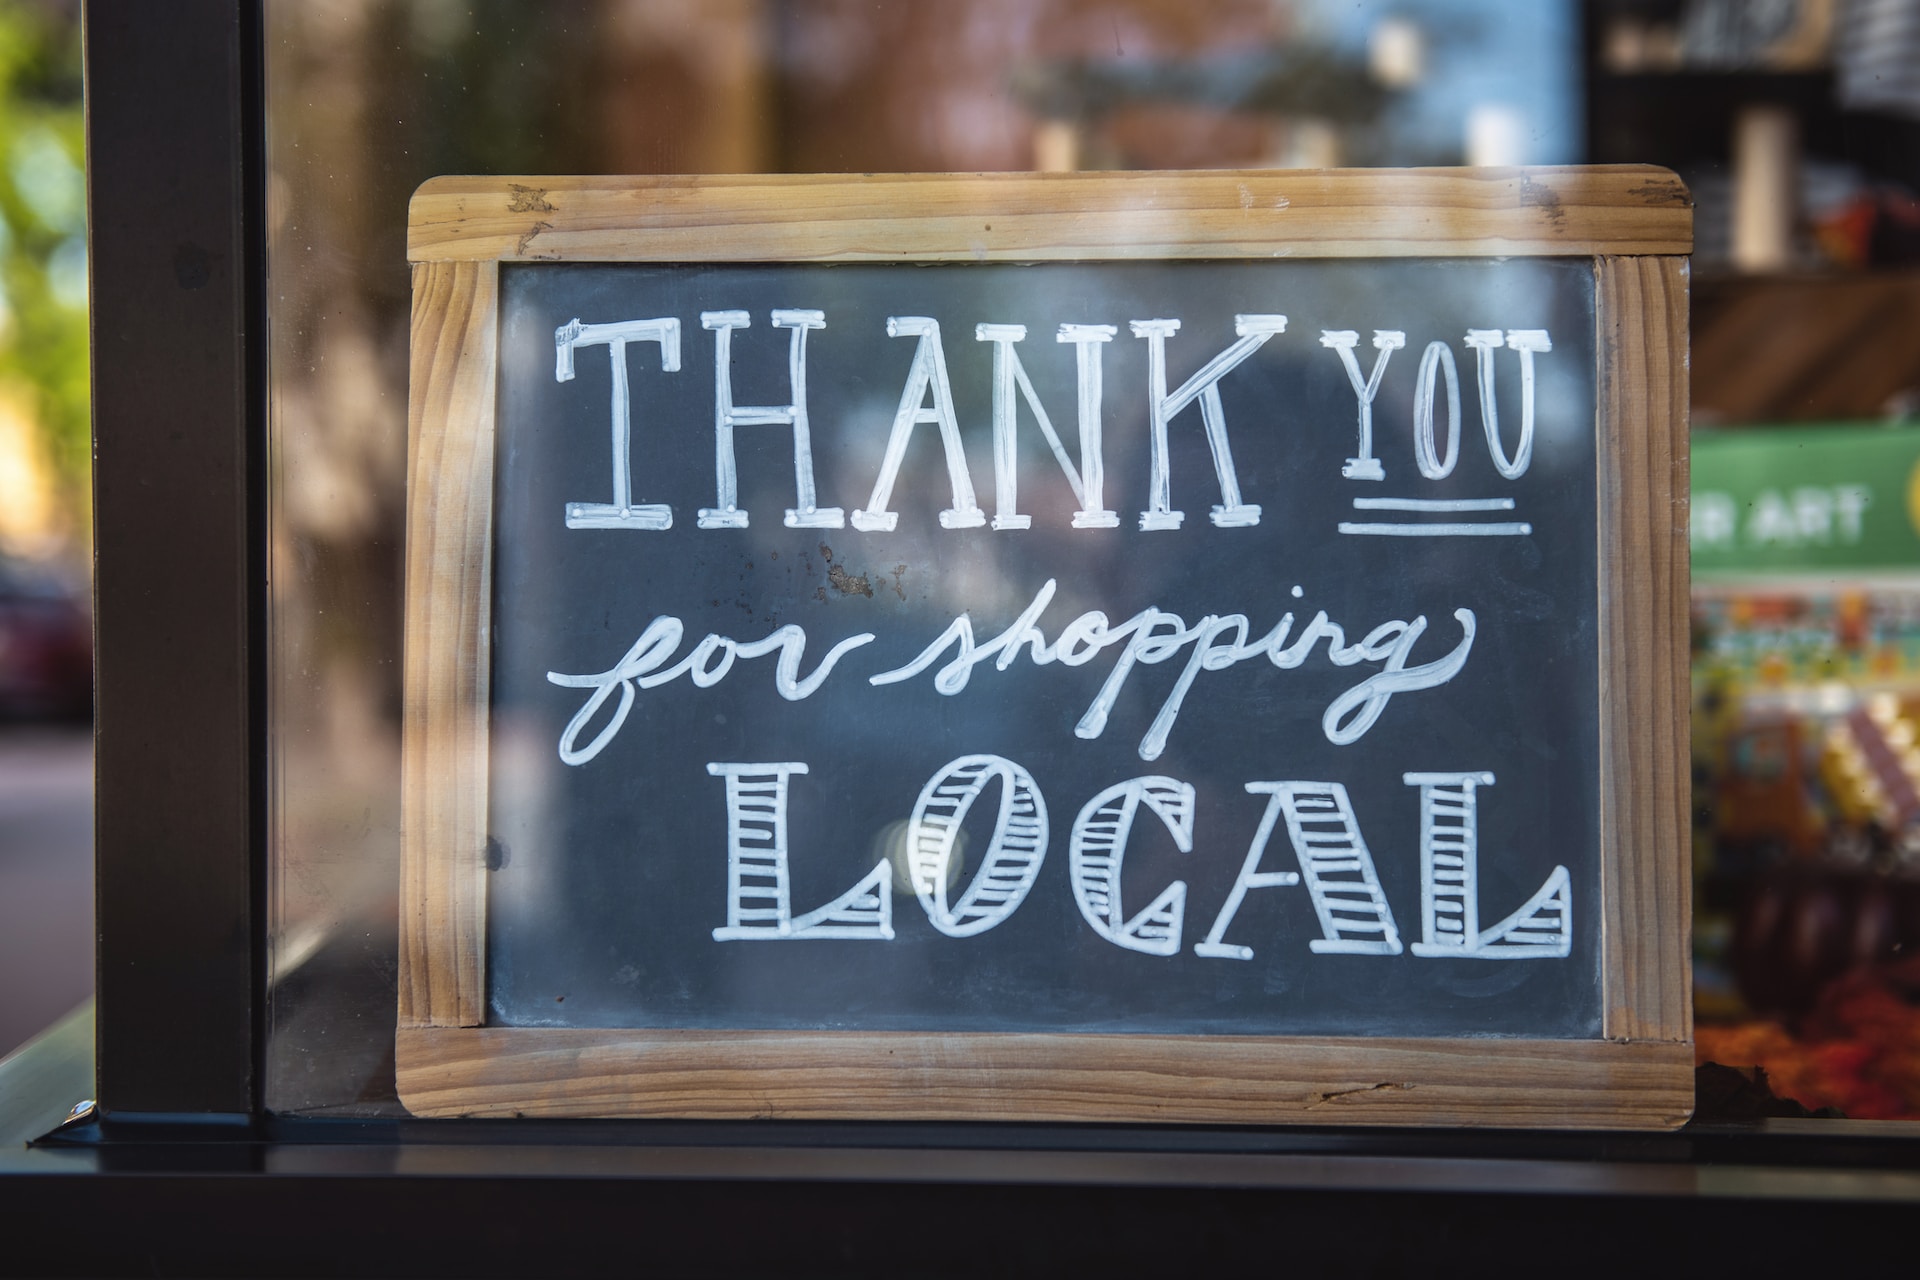 thank you for shopping local sign - small business